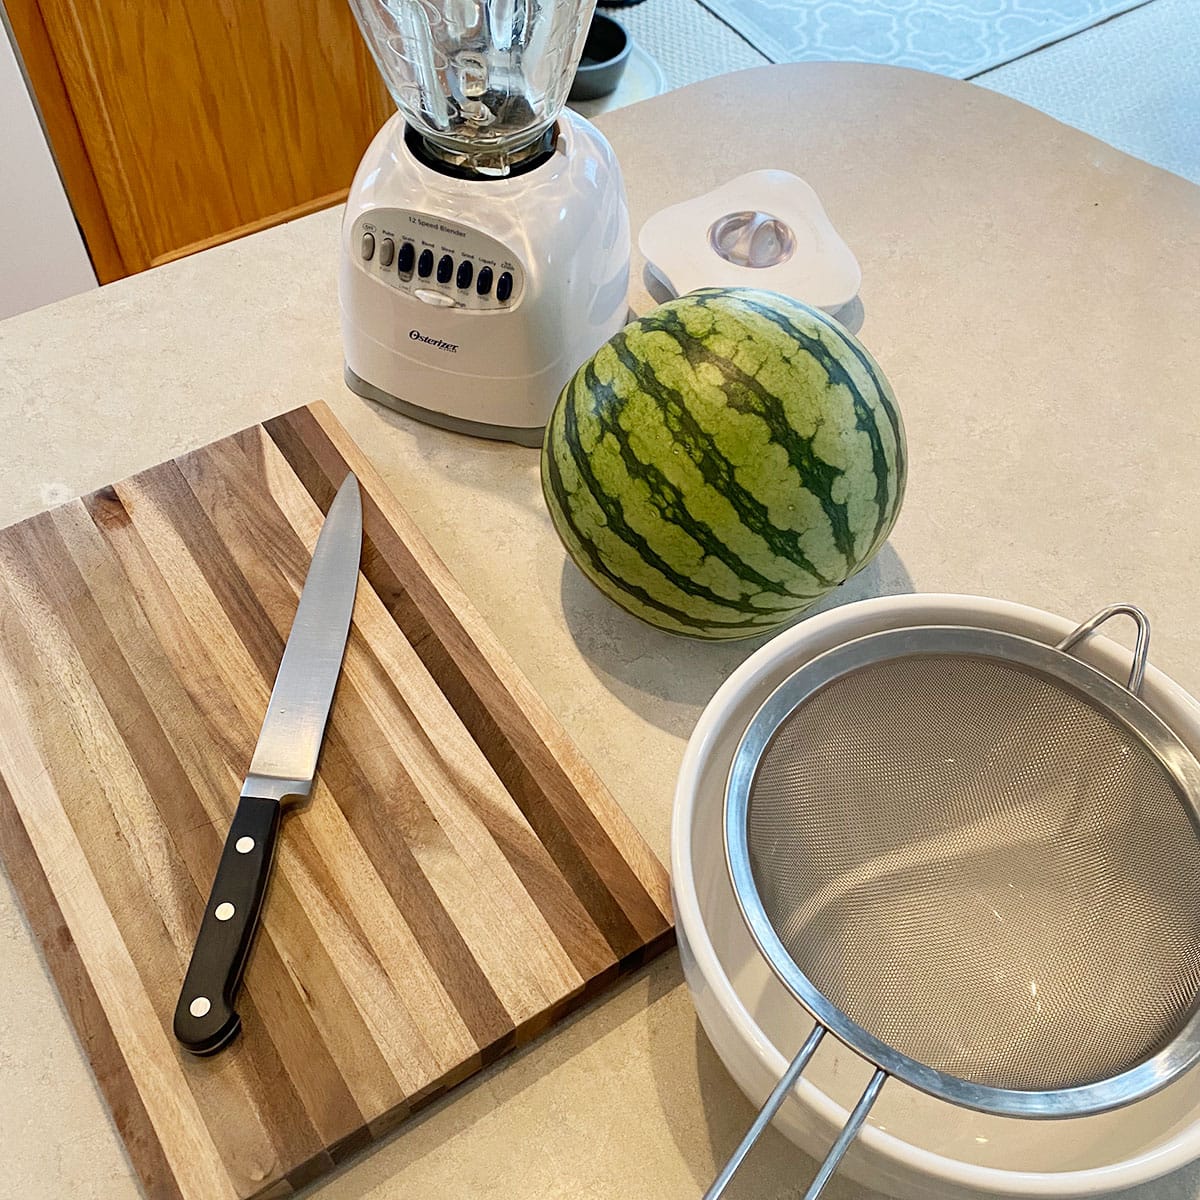 Everything you need to make watermelon juice.